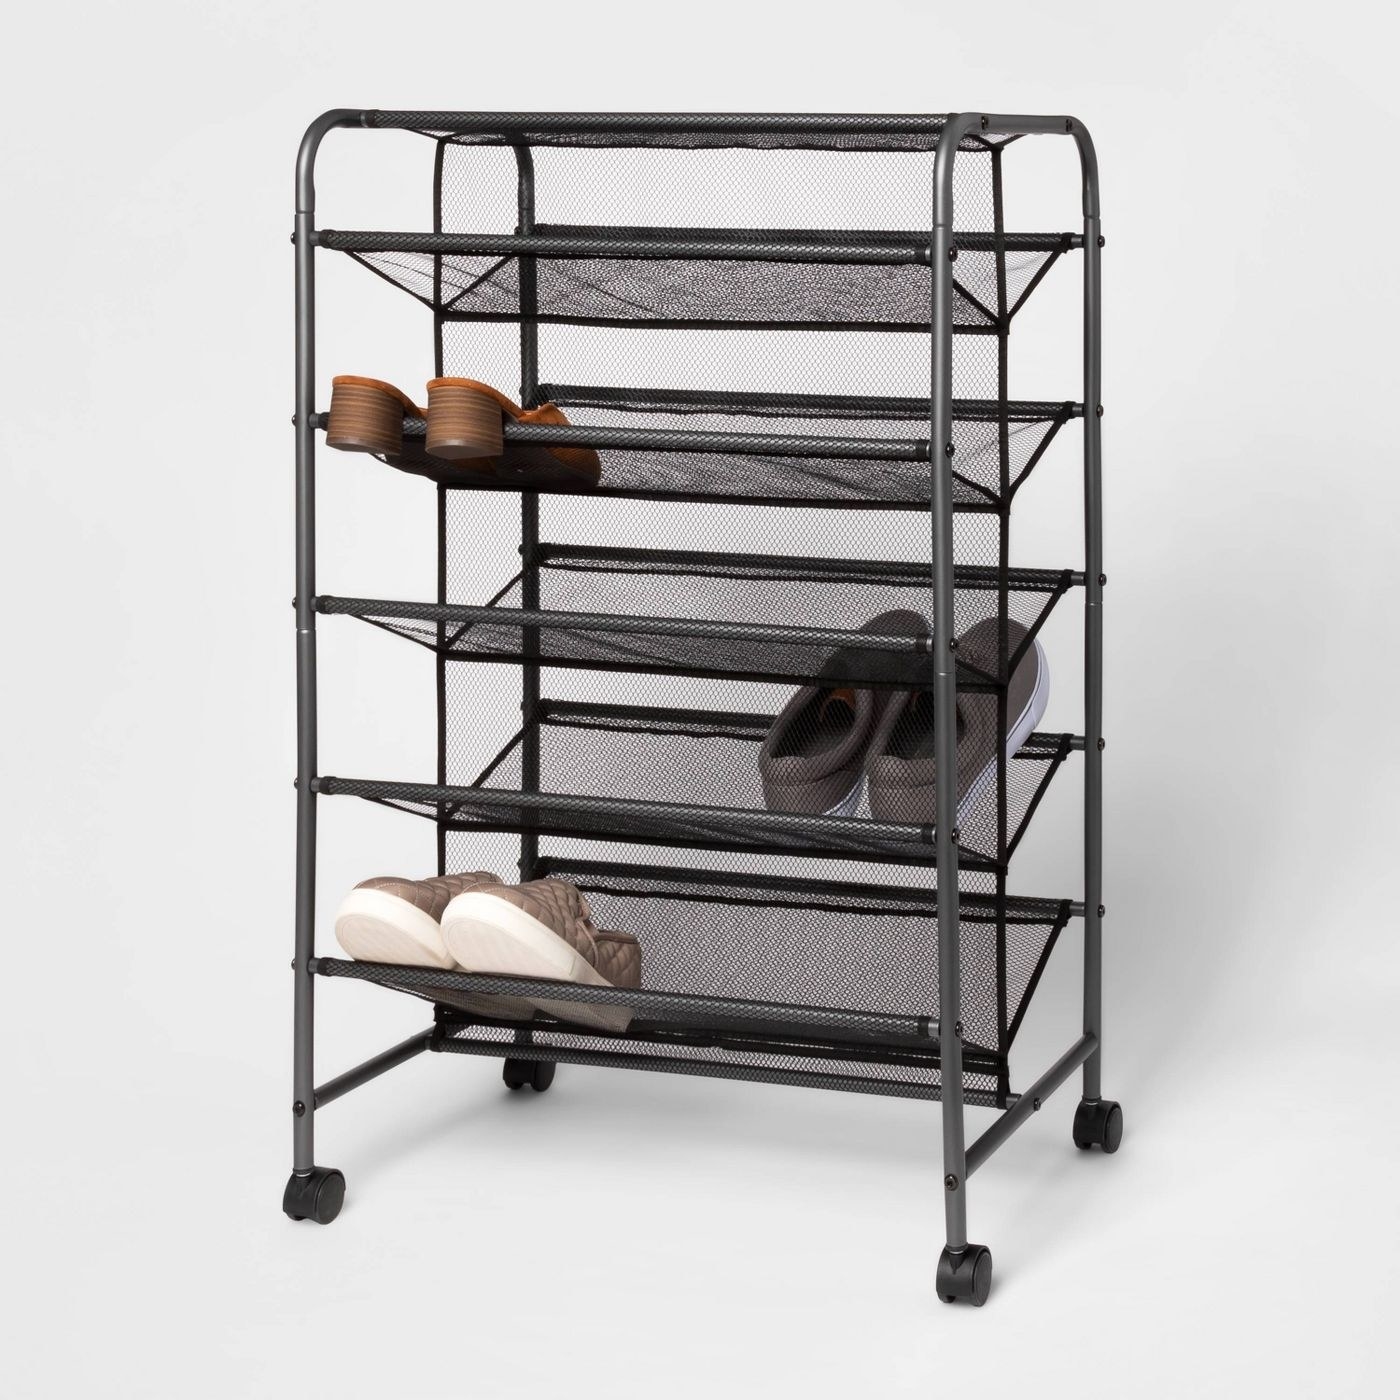 An image of a double-sided shoe rack